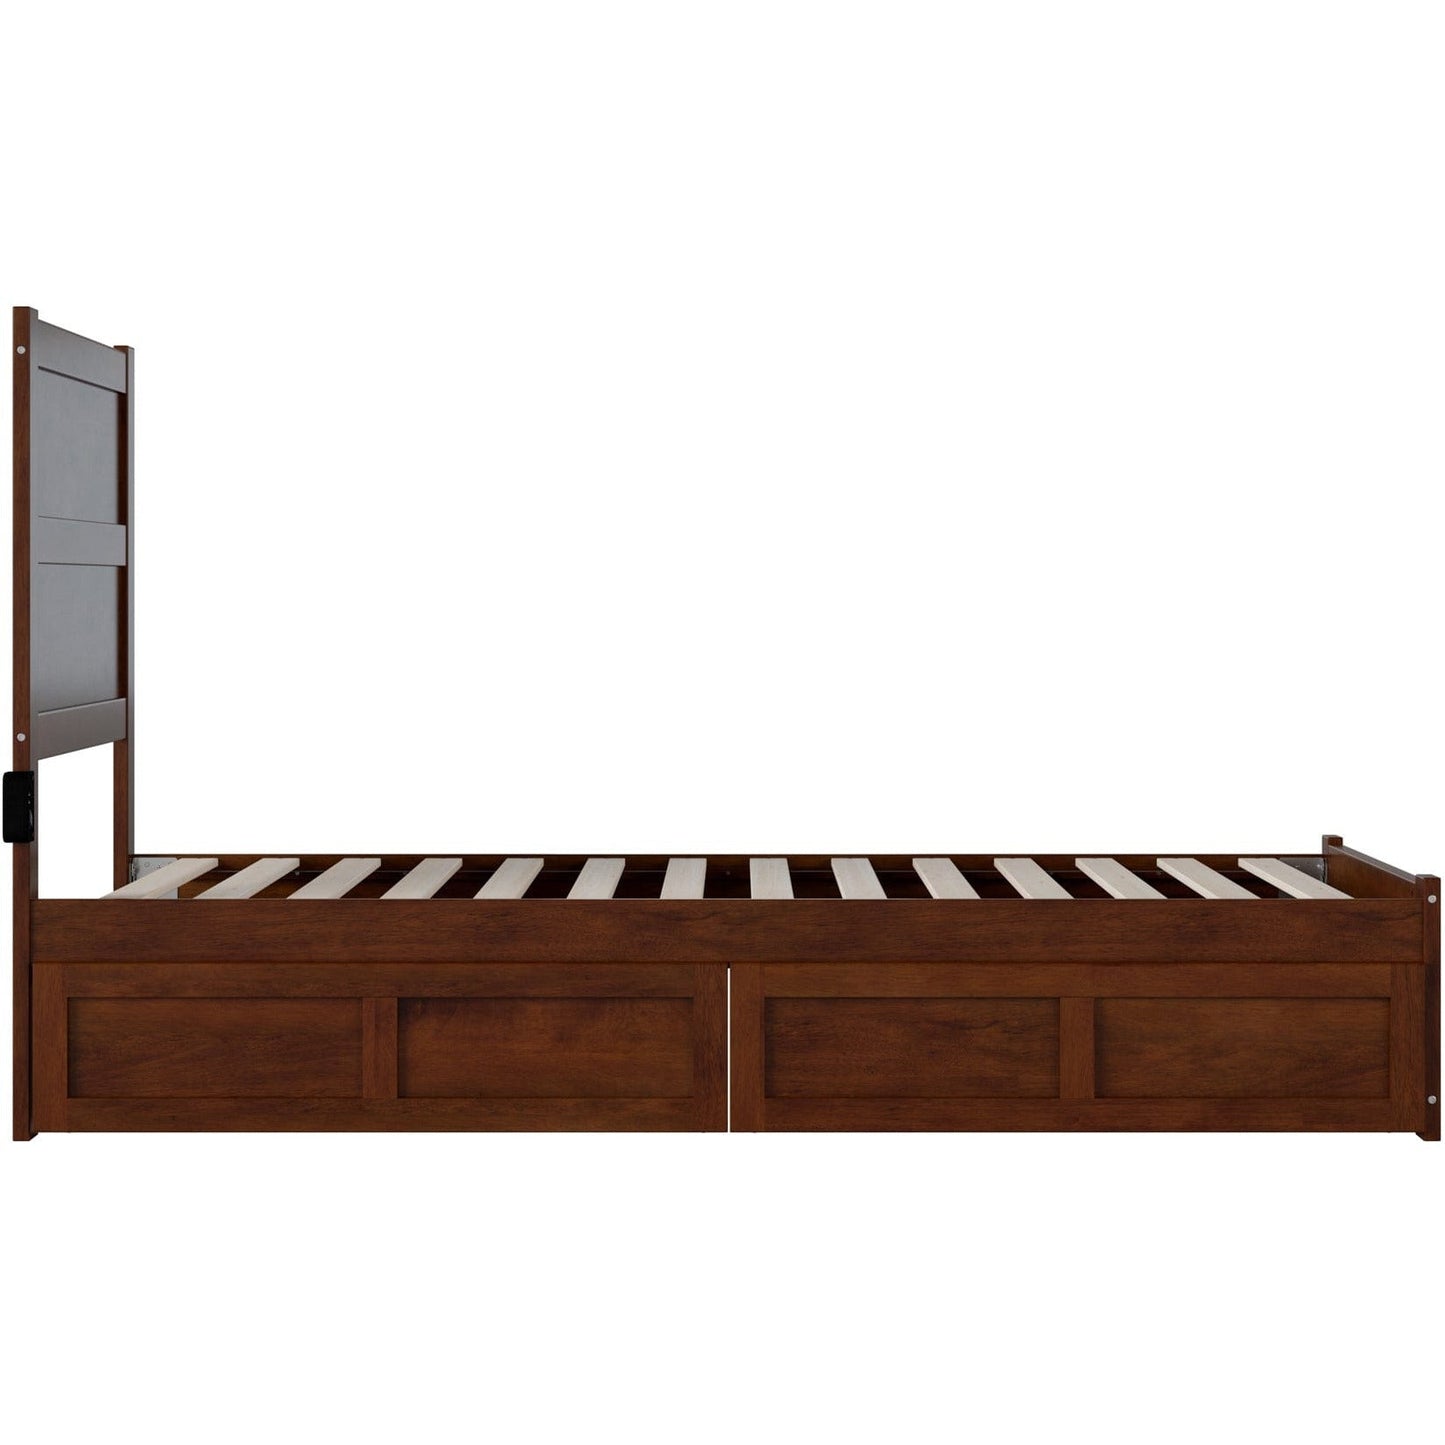 AFI Furnishings NoHo Twin Extra Long Bed with Footboard and 2 Drawers in Walnut AG9163414